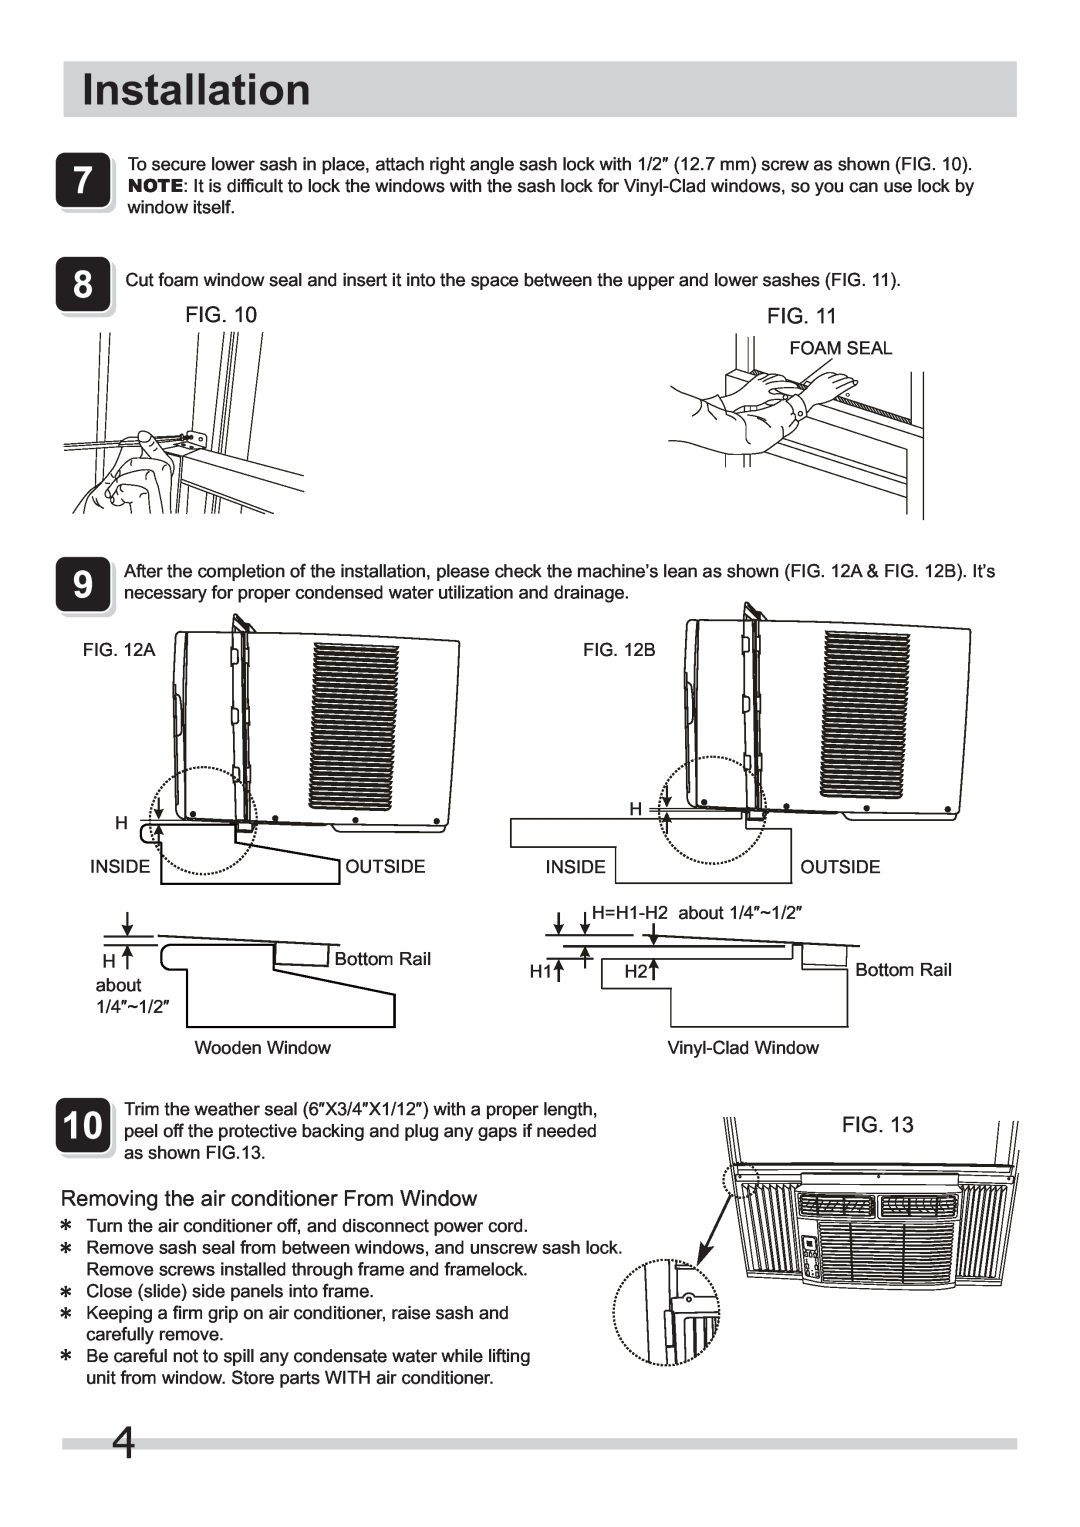 Frigidaire 2020211a1446 installation instructions Installation, Removing the air conditioner From Window 